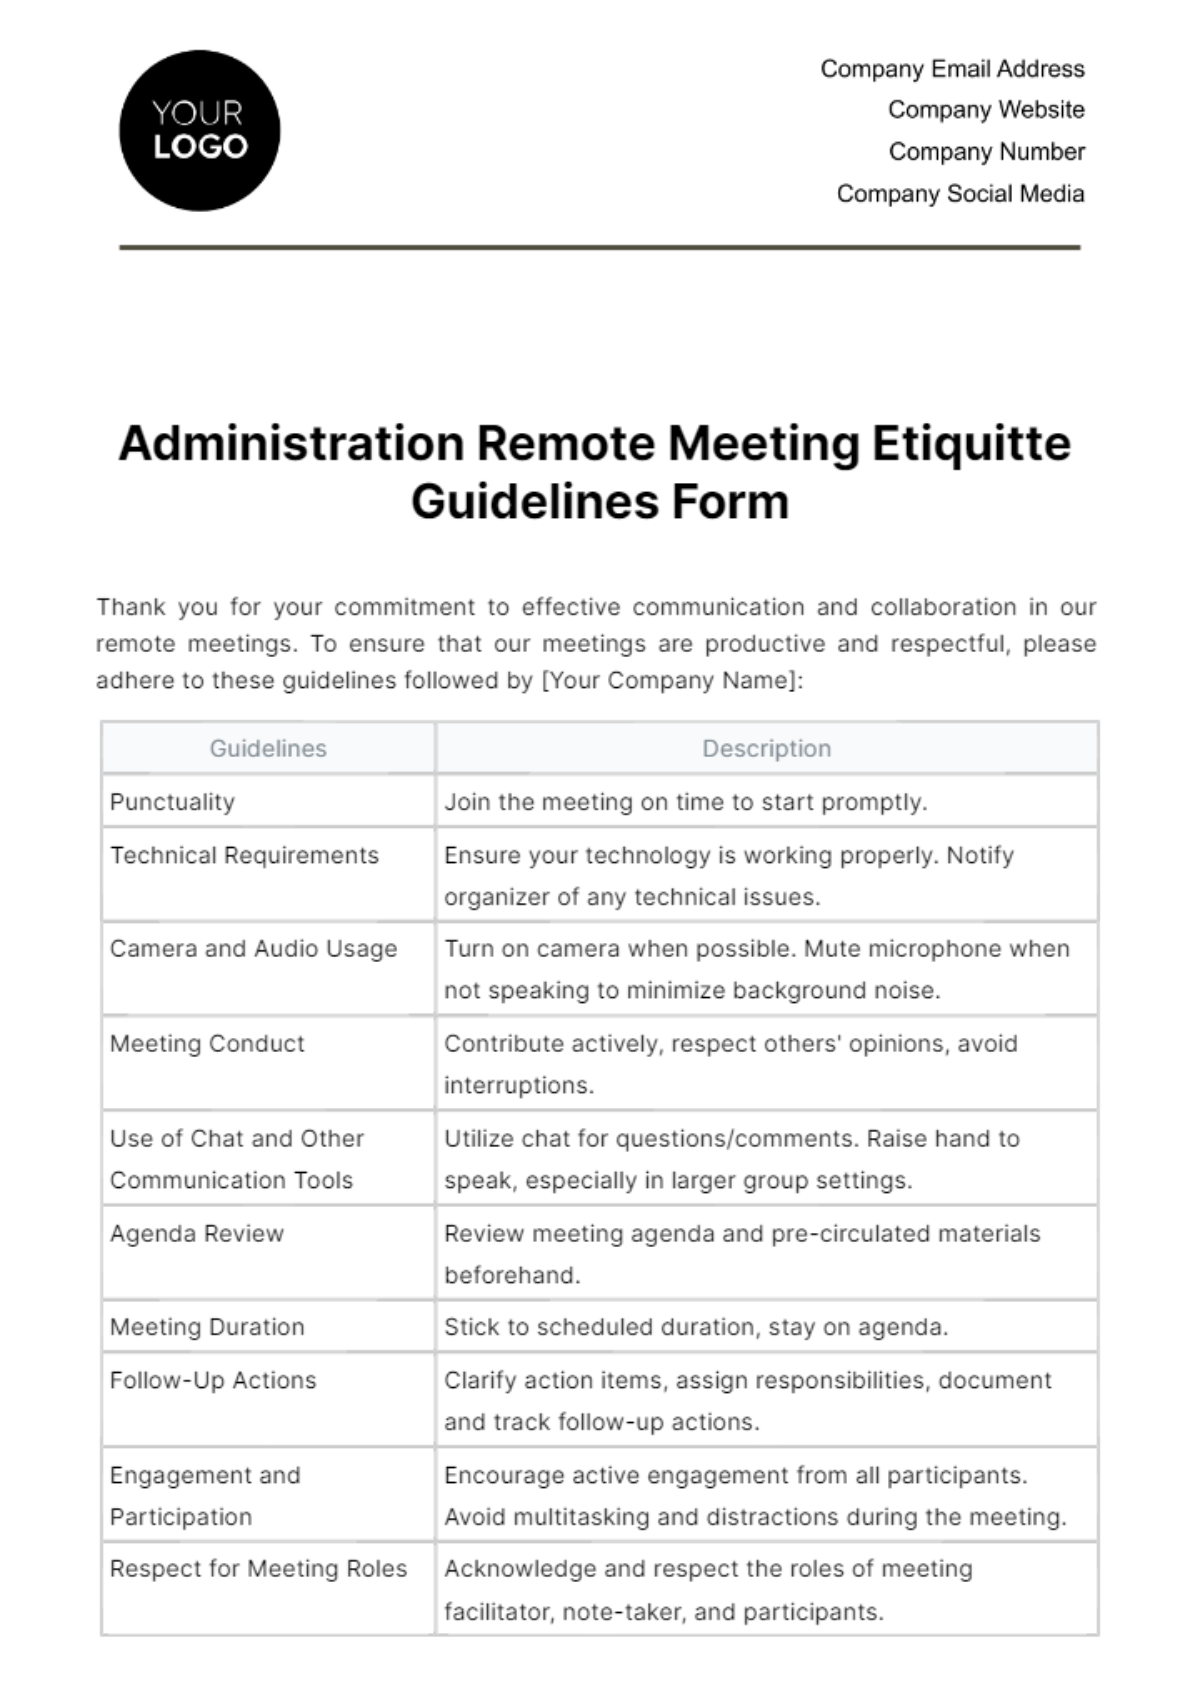 Administration Remote Meeting Etiquette Guidelines Form Template